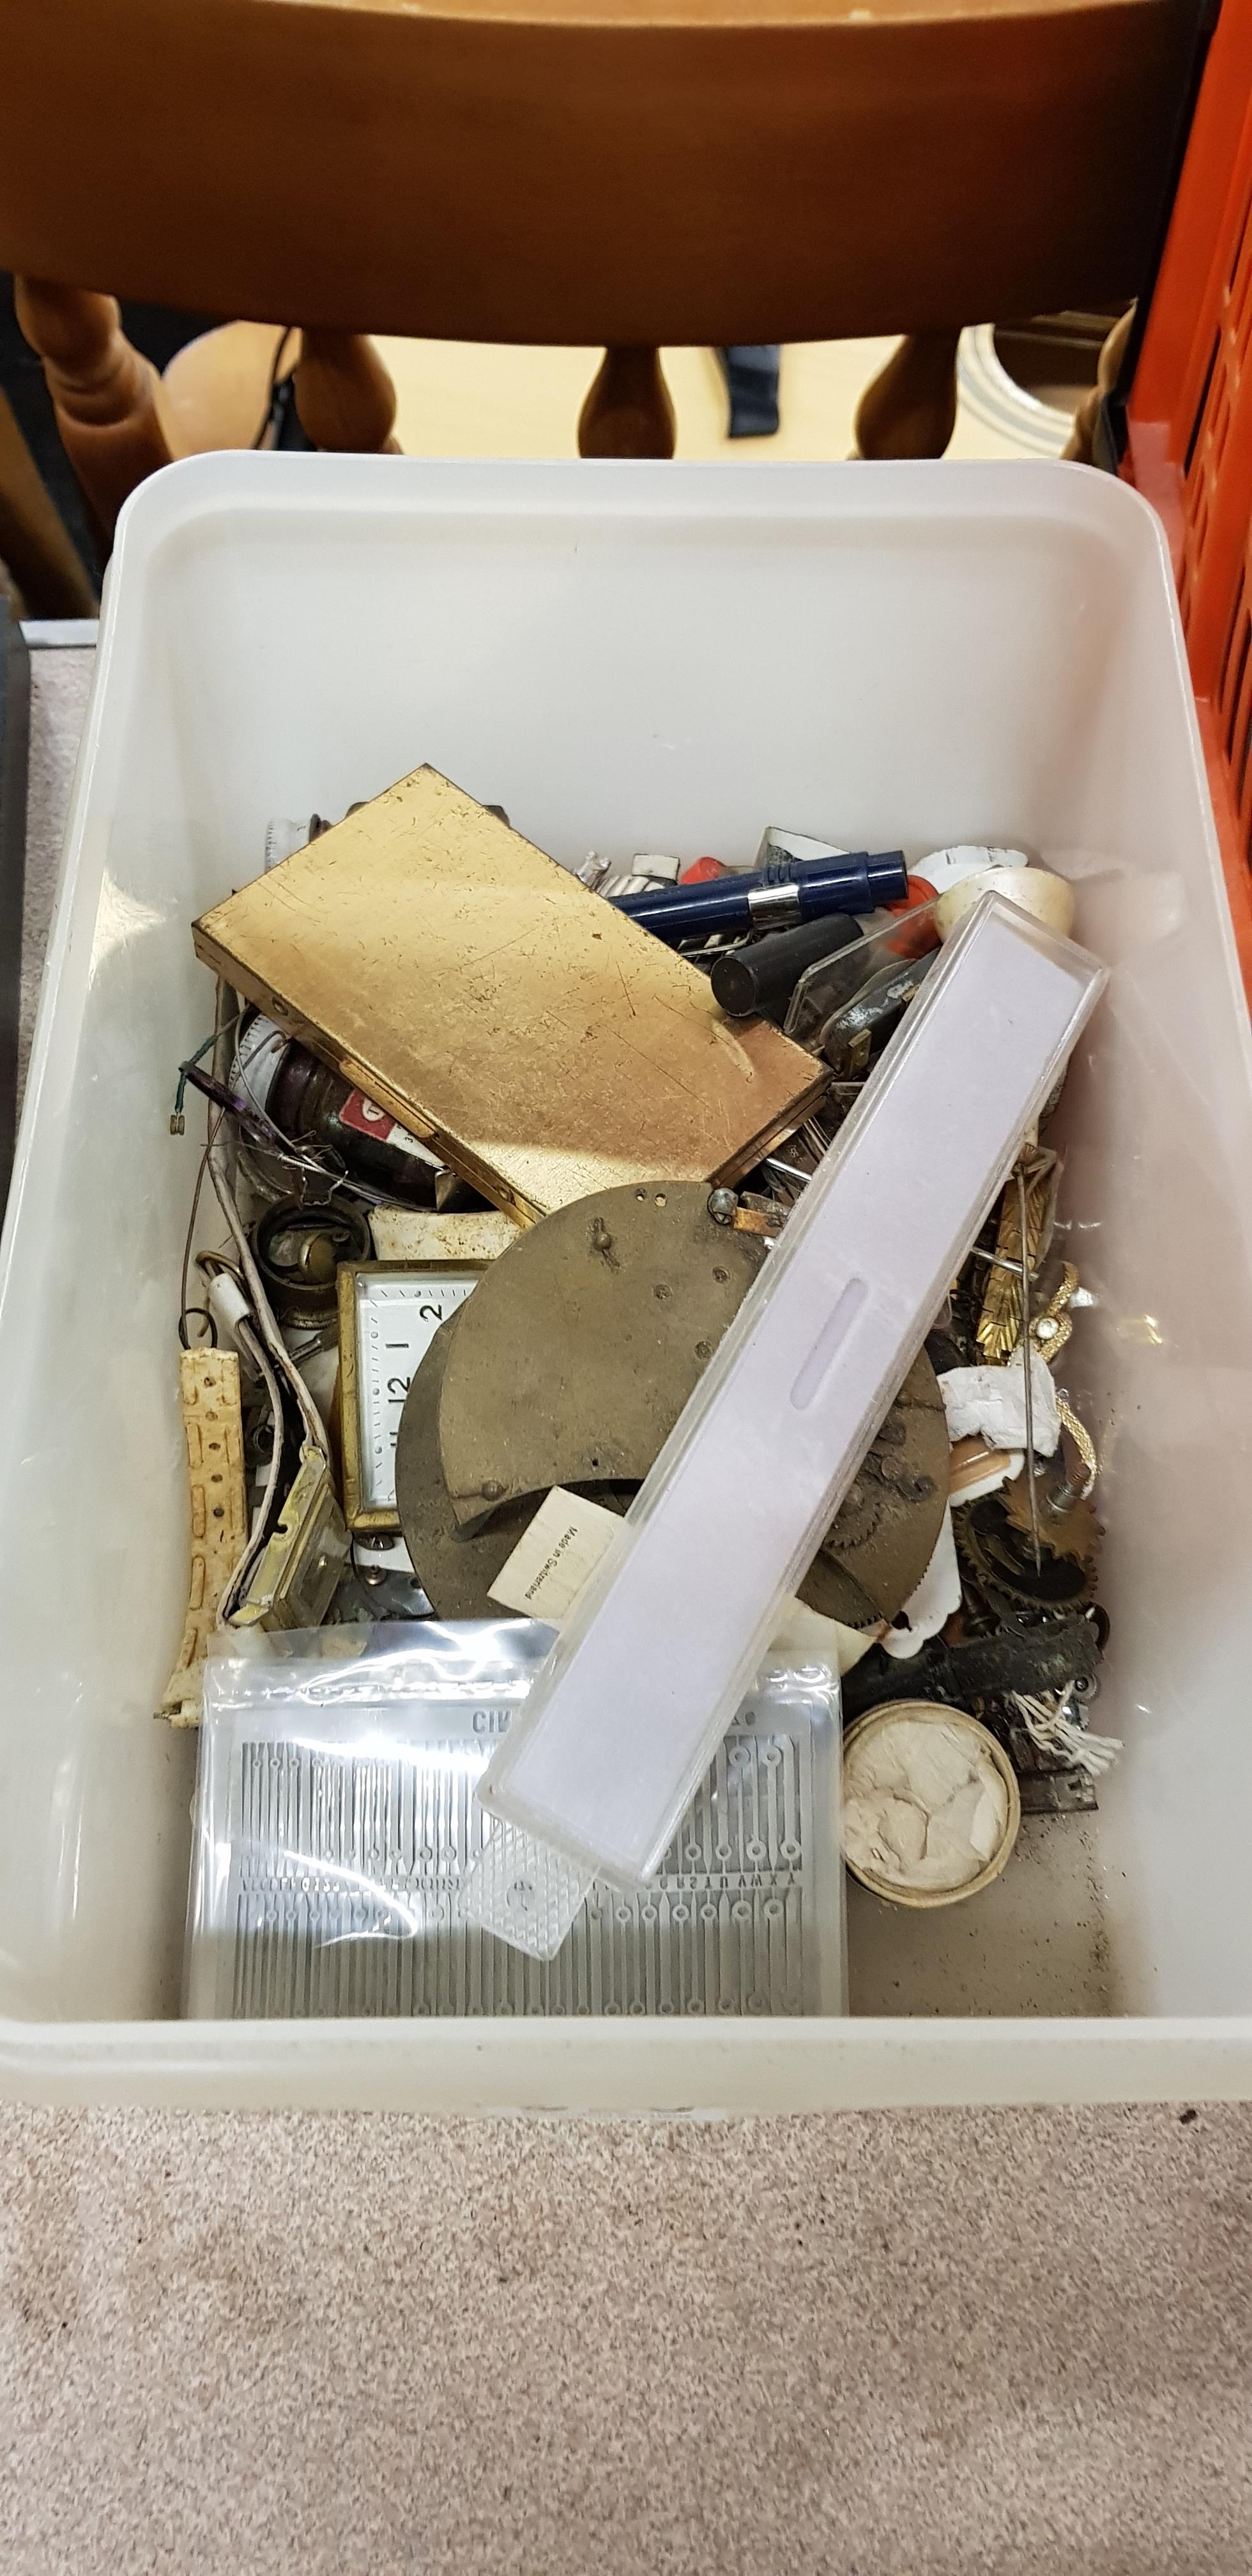 TUB OF OLD WATCH PARTS